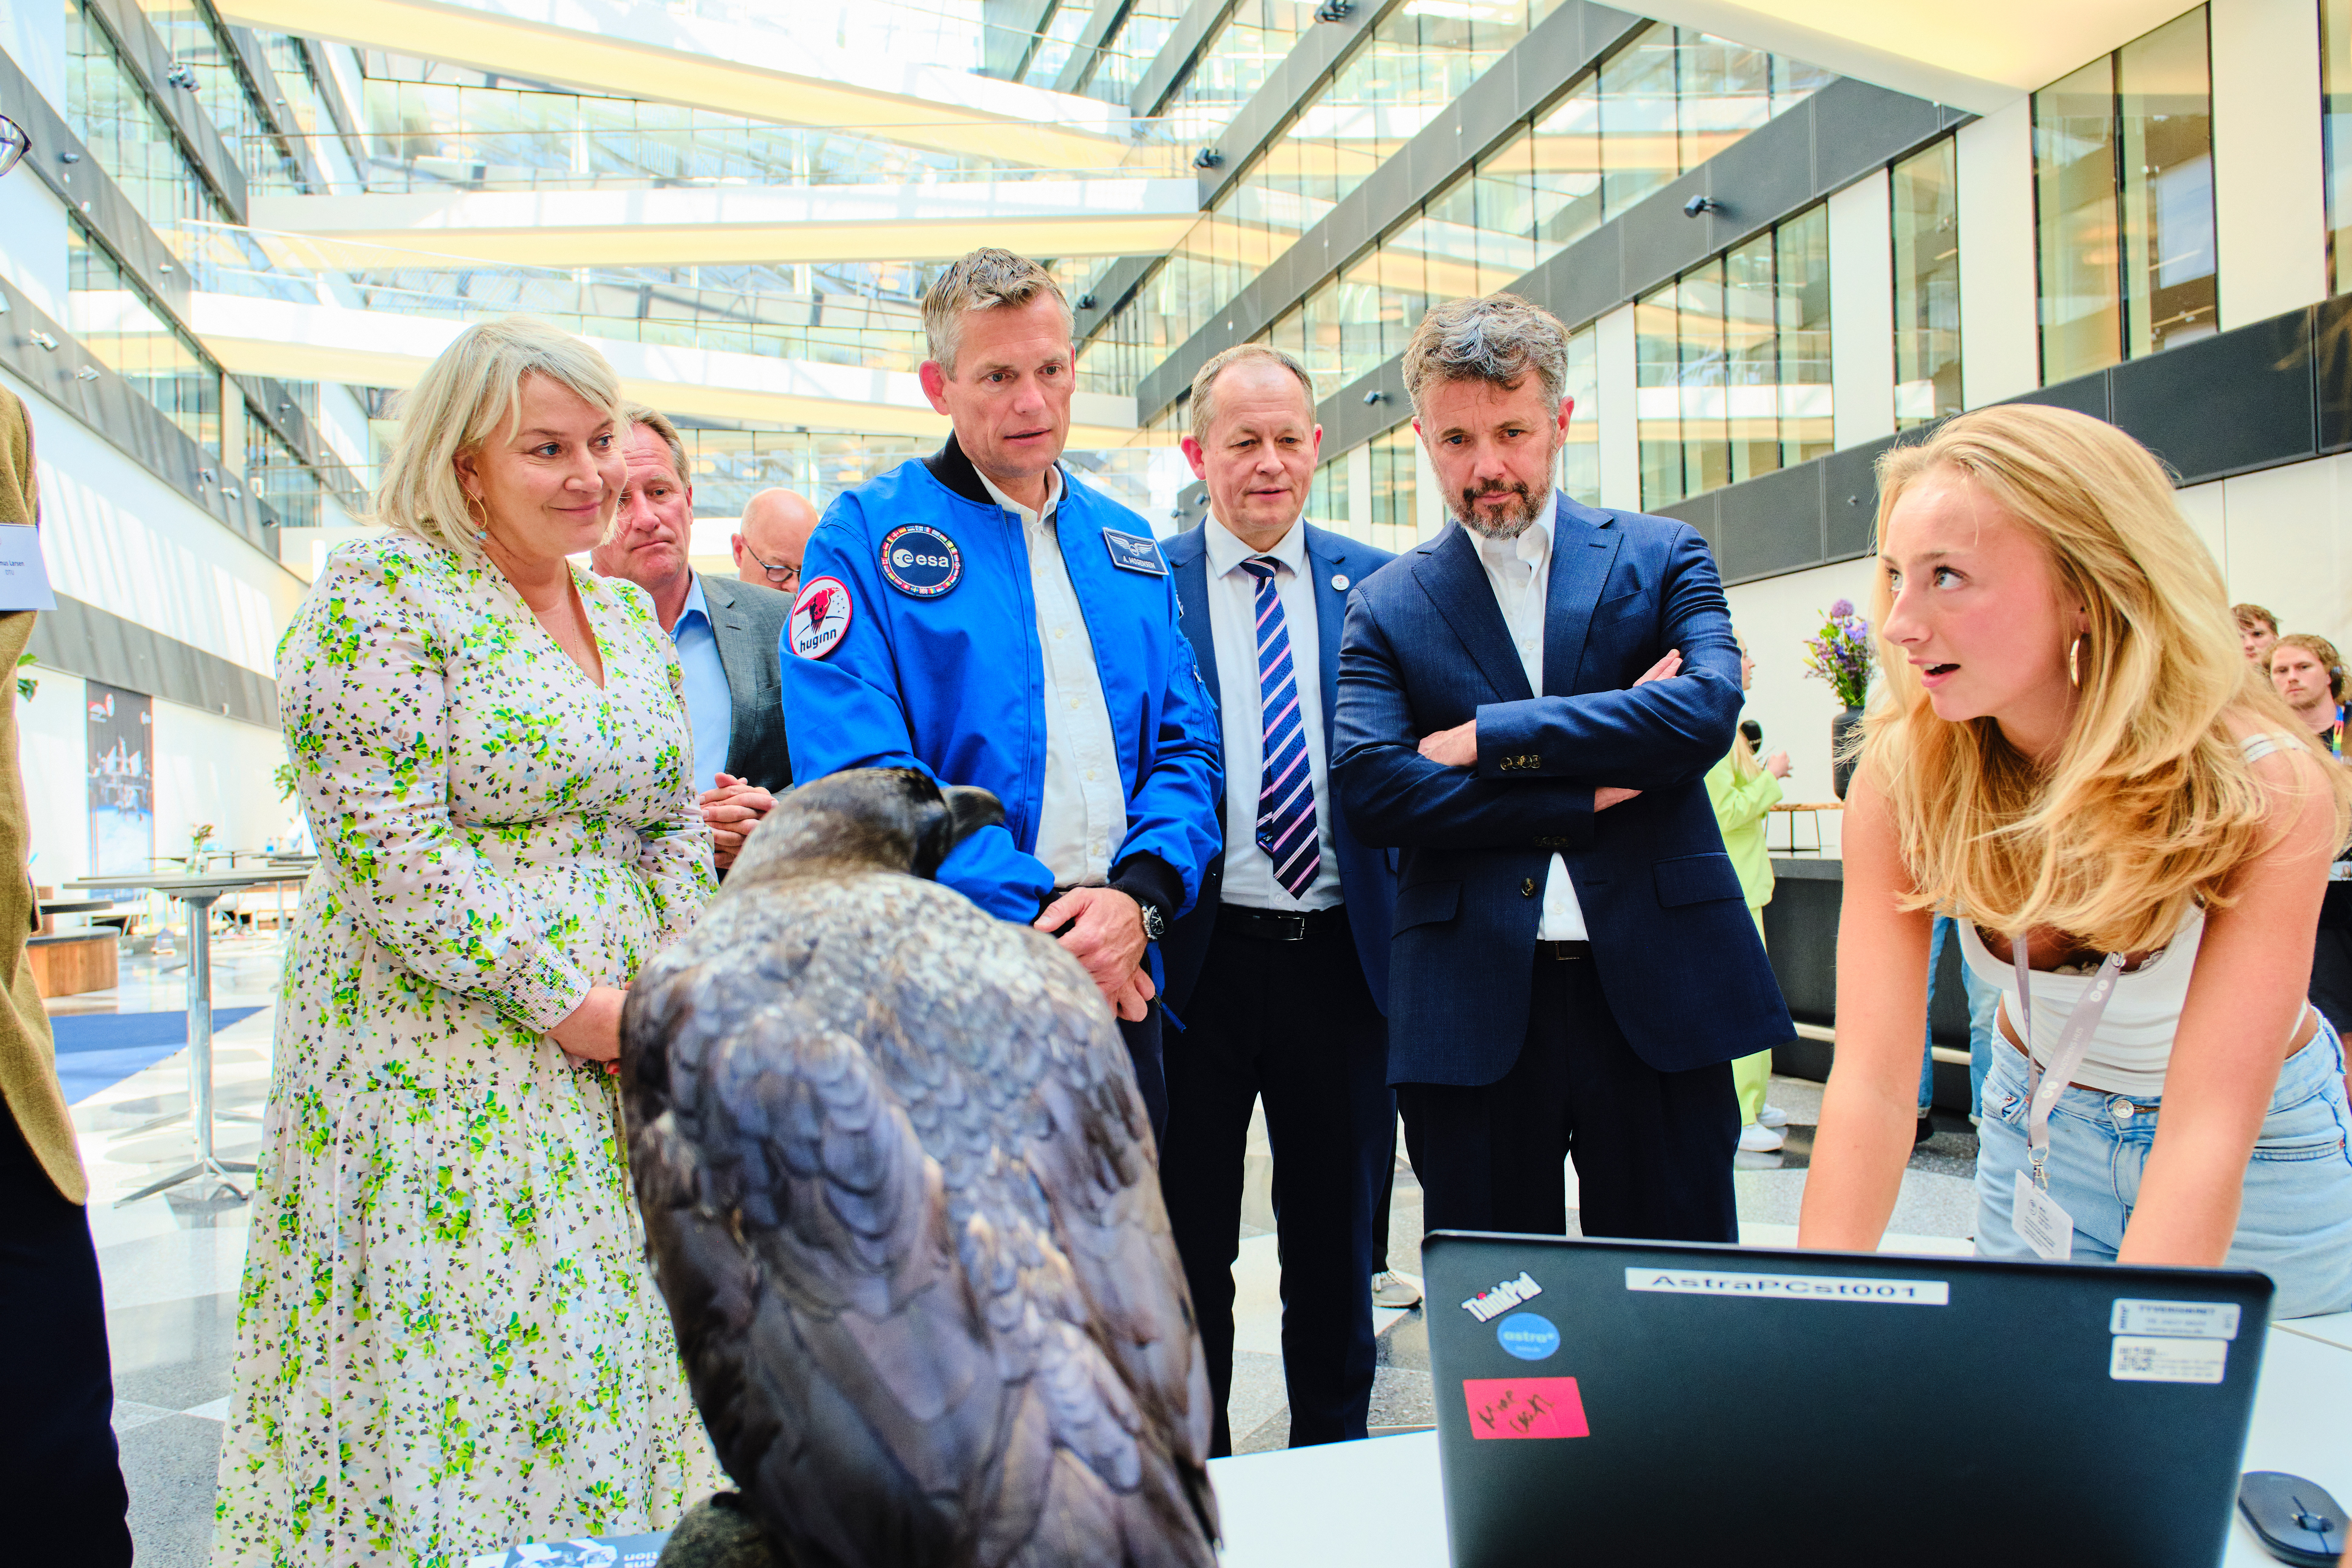 Youth from ASTRA demonstrating some of the lessons developed for Huginn. HRH Crown Prince Frederik, Secretary for education and research Christina Egelund and ESA-astronaut Andreas Mogens is watching. The raven in the foreground is on loan from The Museum of Natural History, Aarhus. Foto: DI